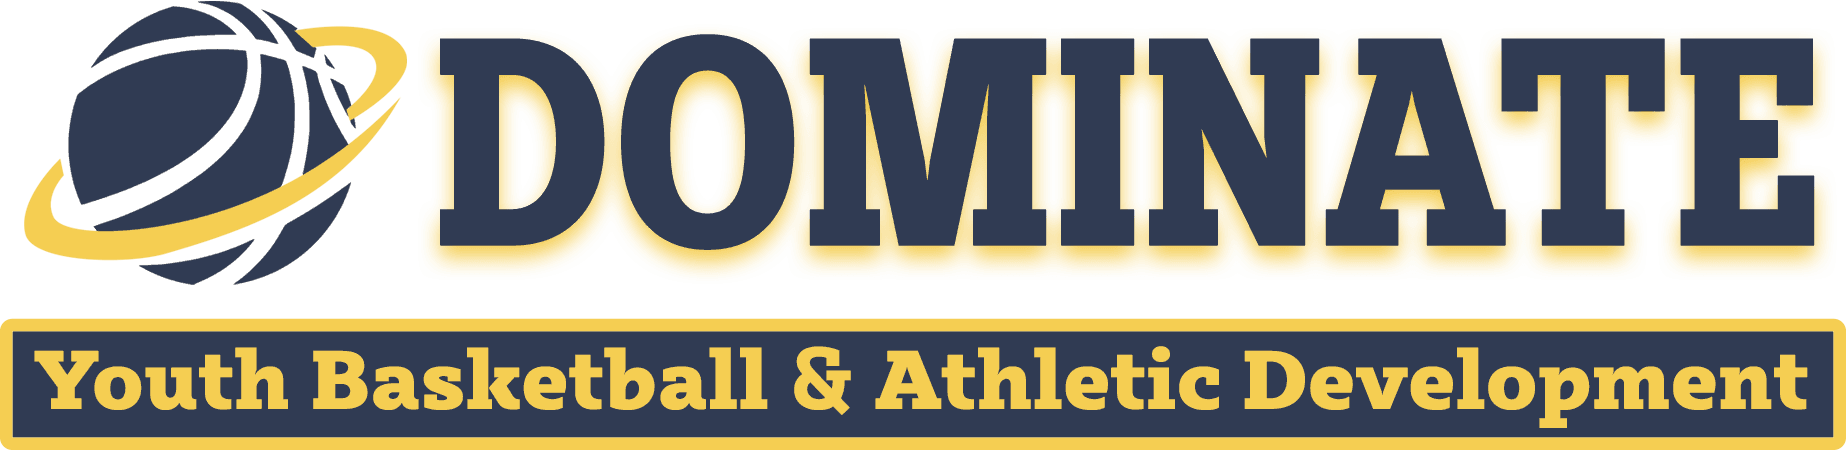 Dominate | Youth Basketball & Athletic Development